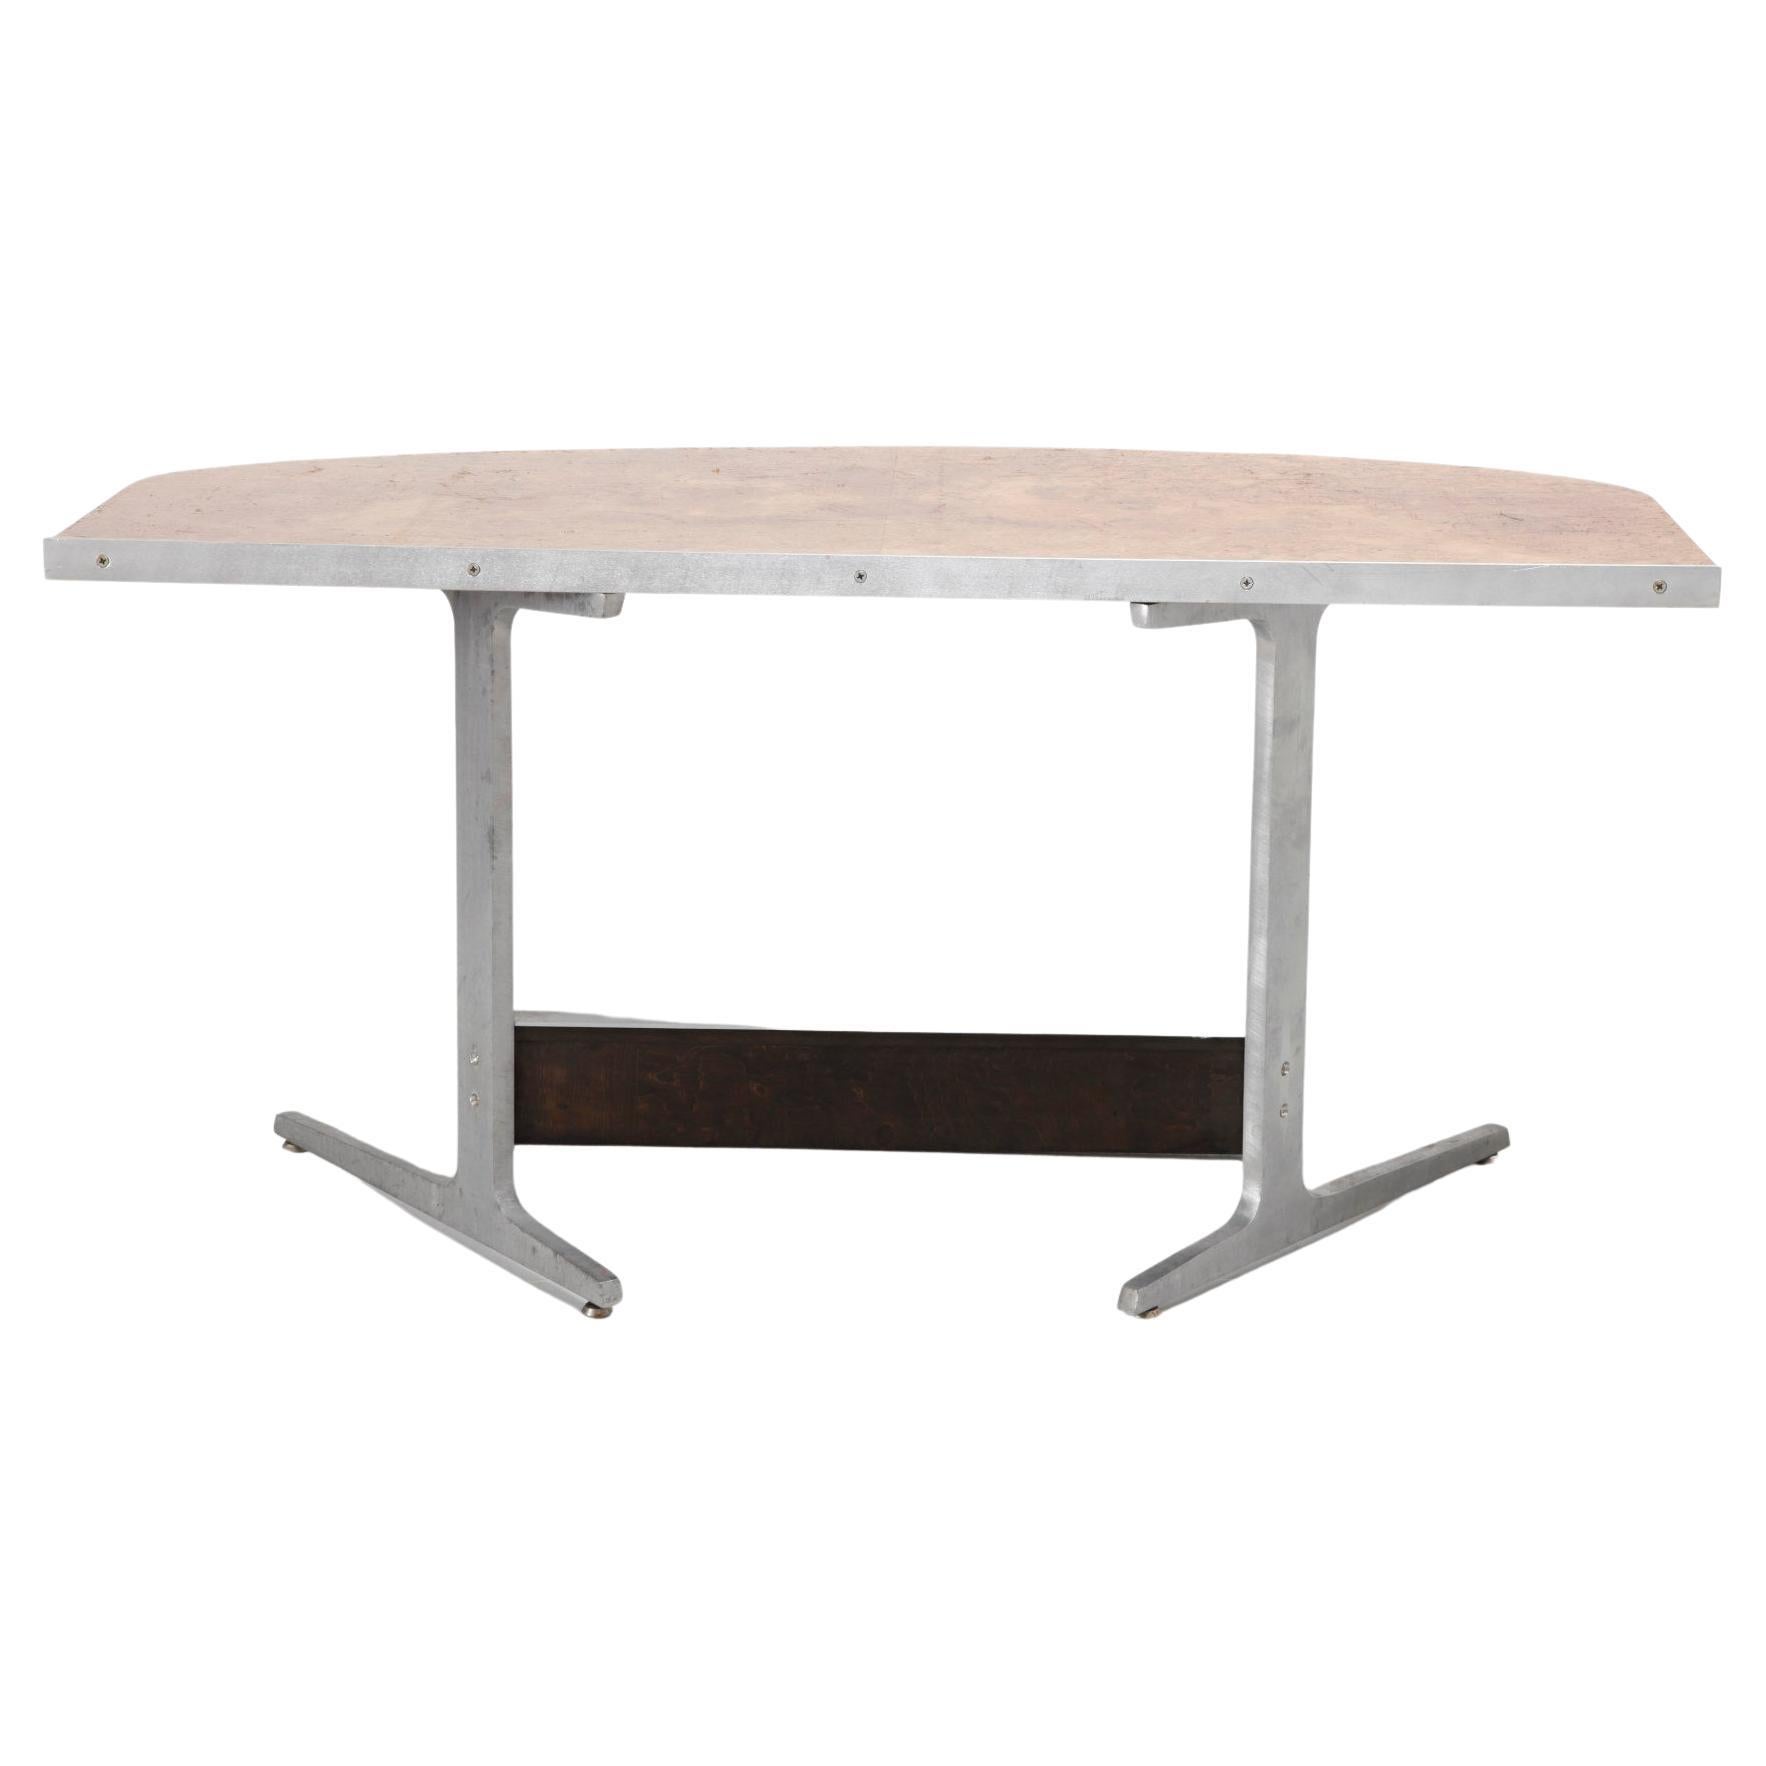 Rare Burl-wood minimalist desk with a solid wooden top and aluminium base. The top of the desk gives a floating effect. A perfect desk, table or console to place against the wall because of its contoured back with aluminum, the front is round